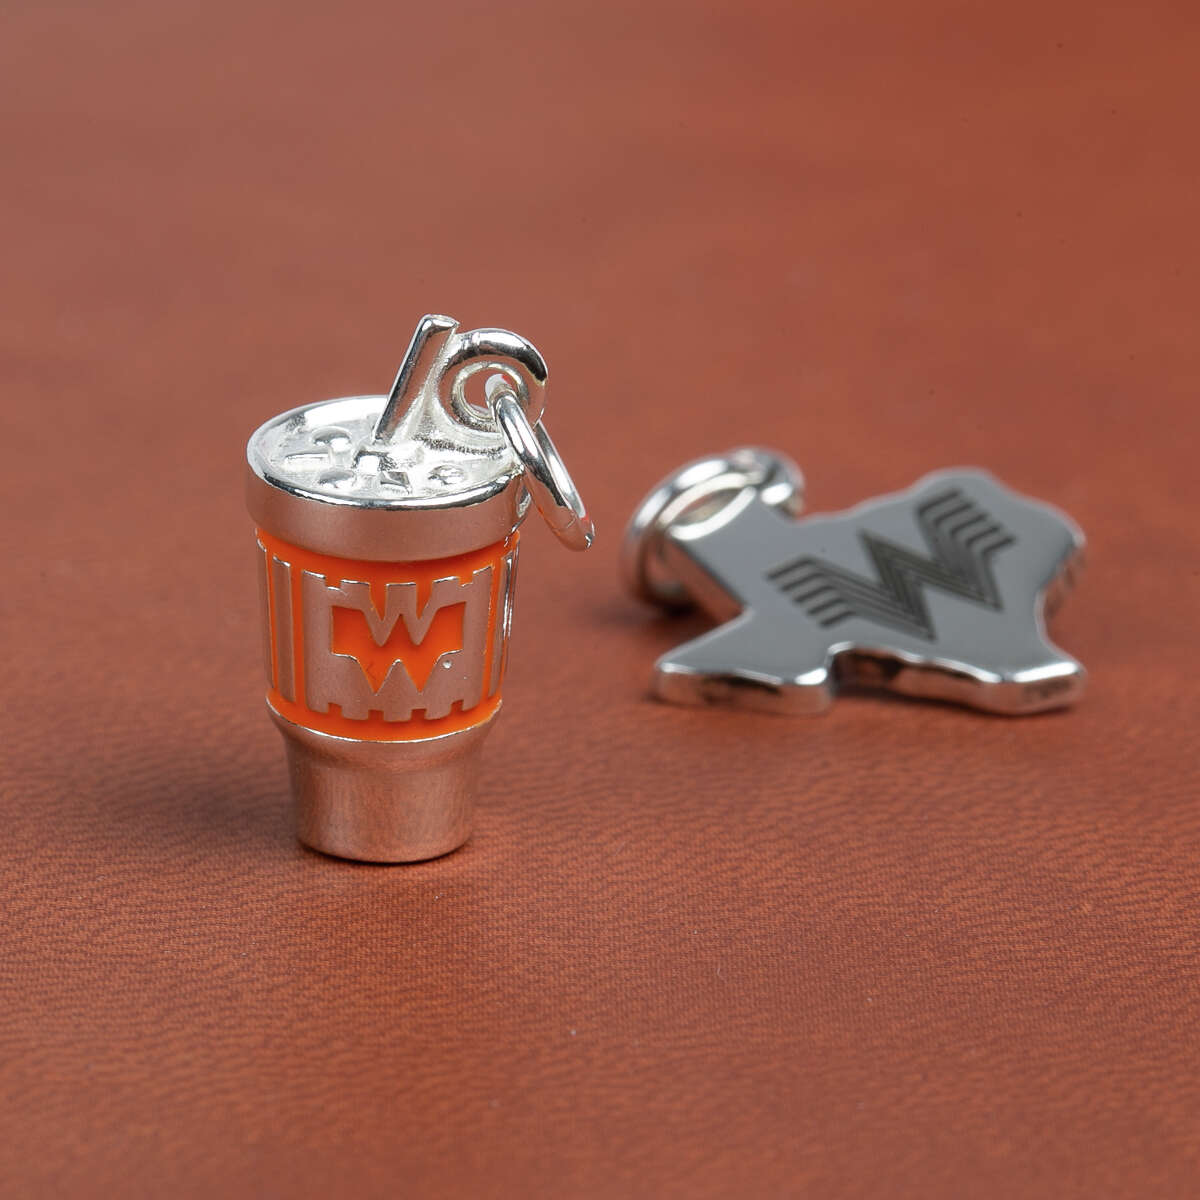 Whataburger and James Avery fans can show everyone that their cups runneth over with love for the two brands via a brand-new sterling silver charm. The Texas companies teamed up to create a one-of-a-kind collector's item, a tiny replica of the Whataburger cup, complete with hand-painted orange enamel.